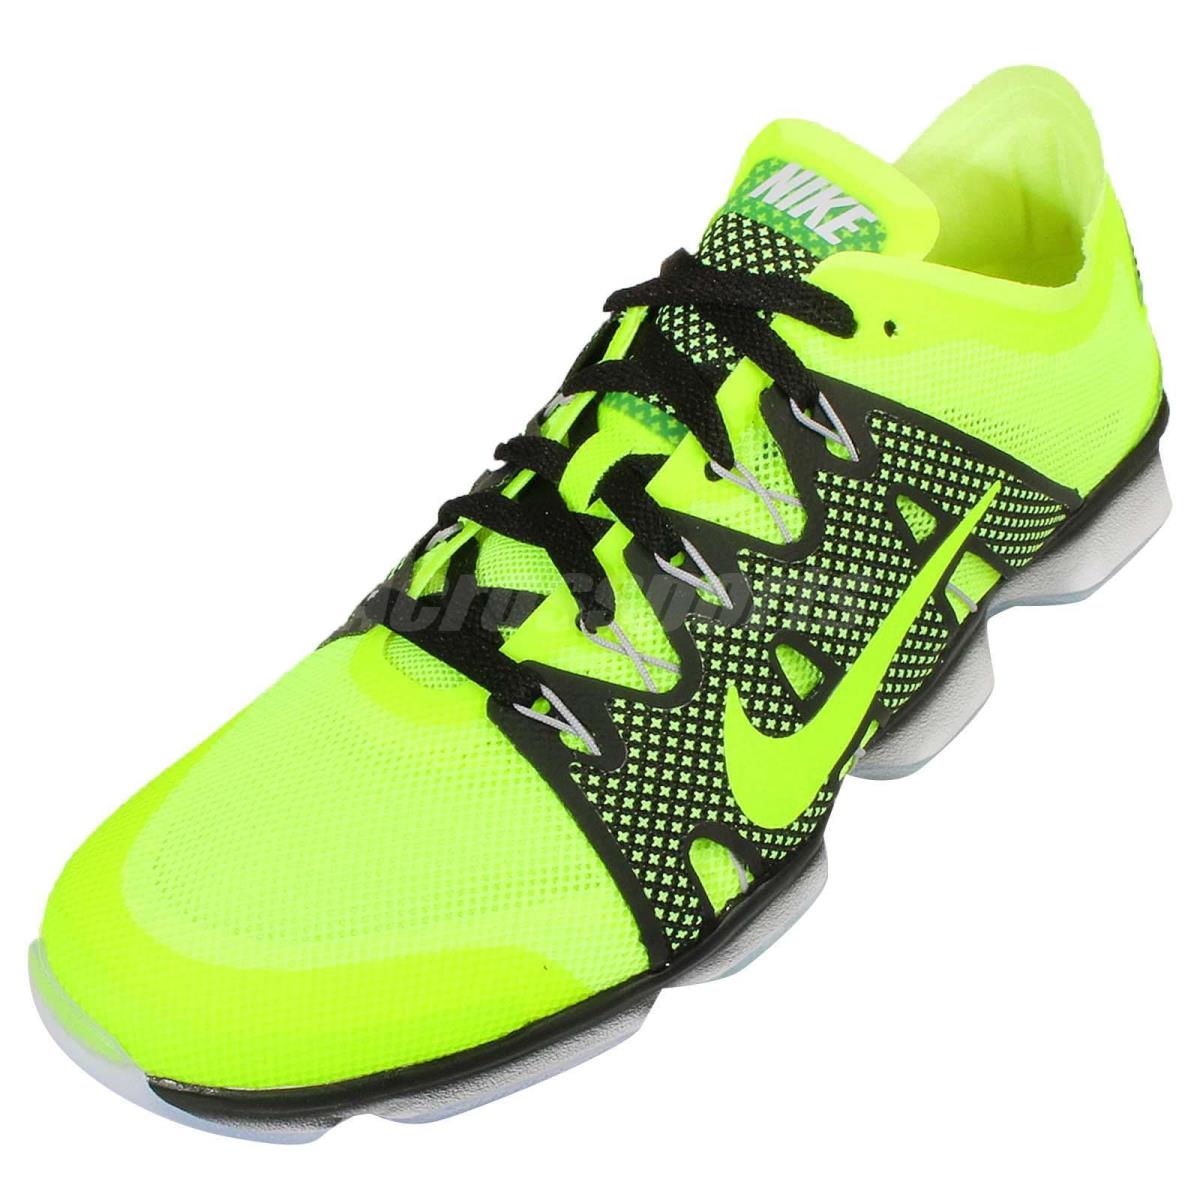 Nike Air Zoom Fit Agility 2 Volt Womens Cross Training Shoes 806472-700 sz 6 - Yellow